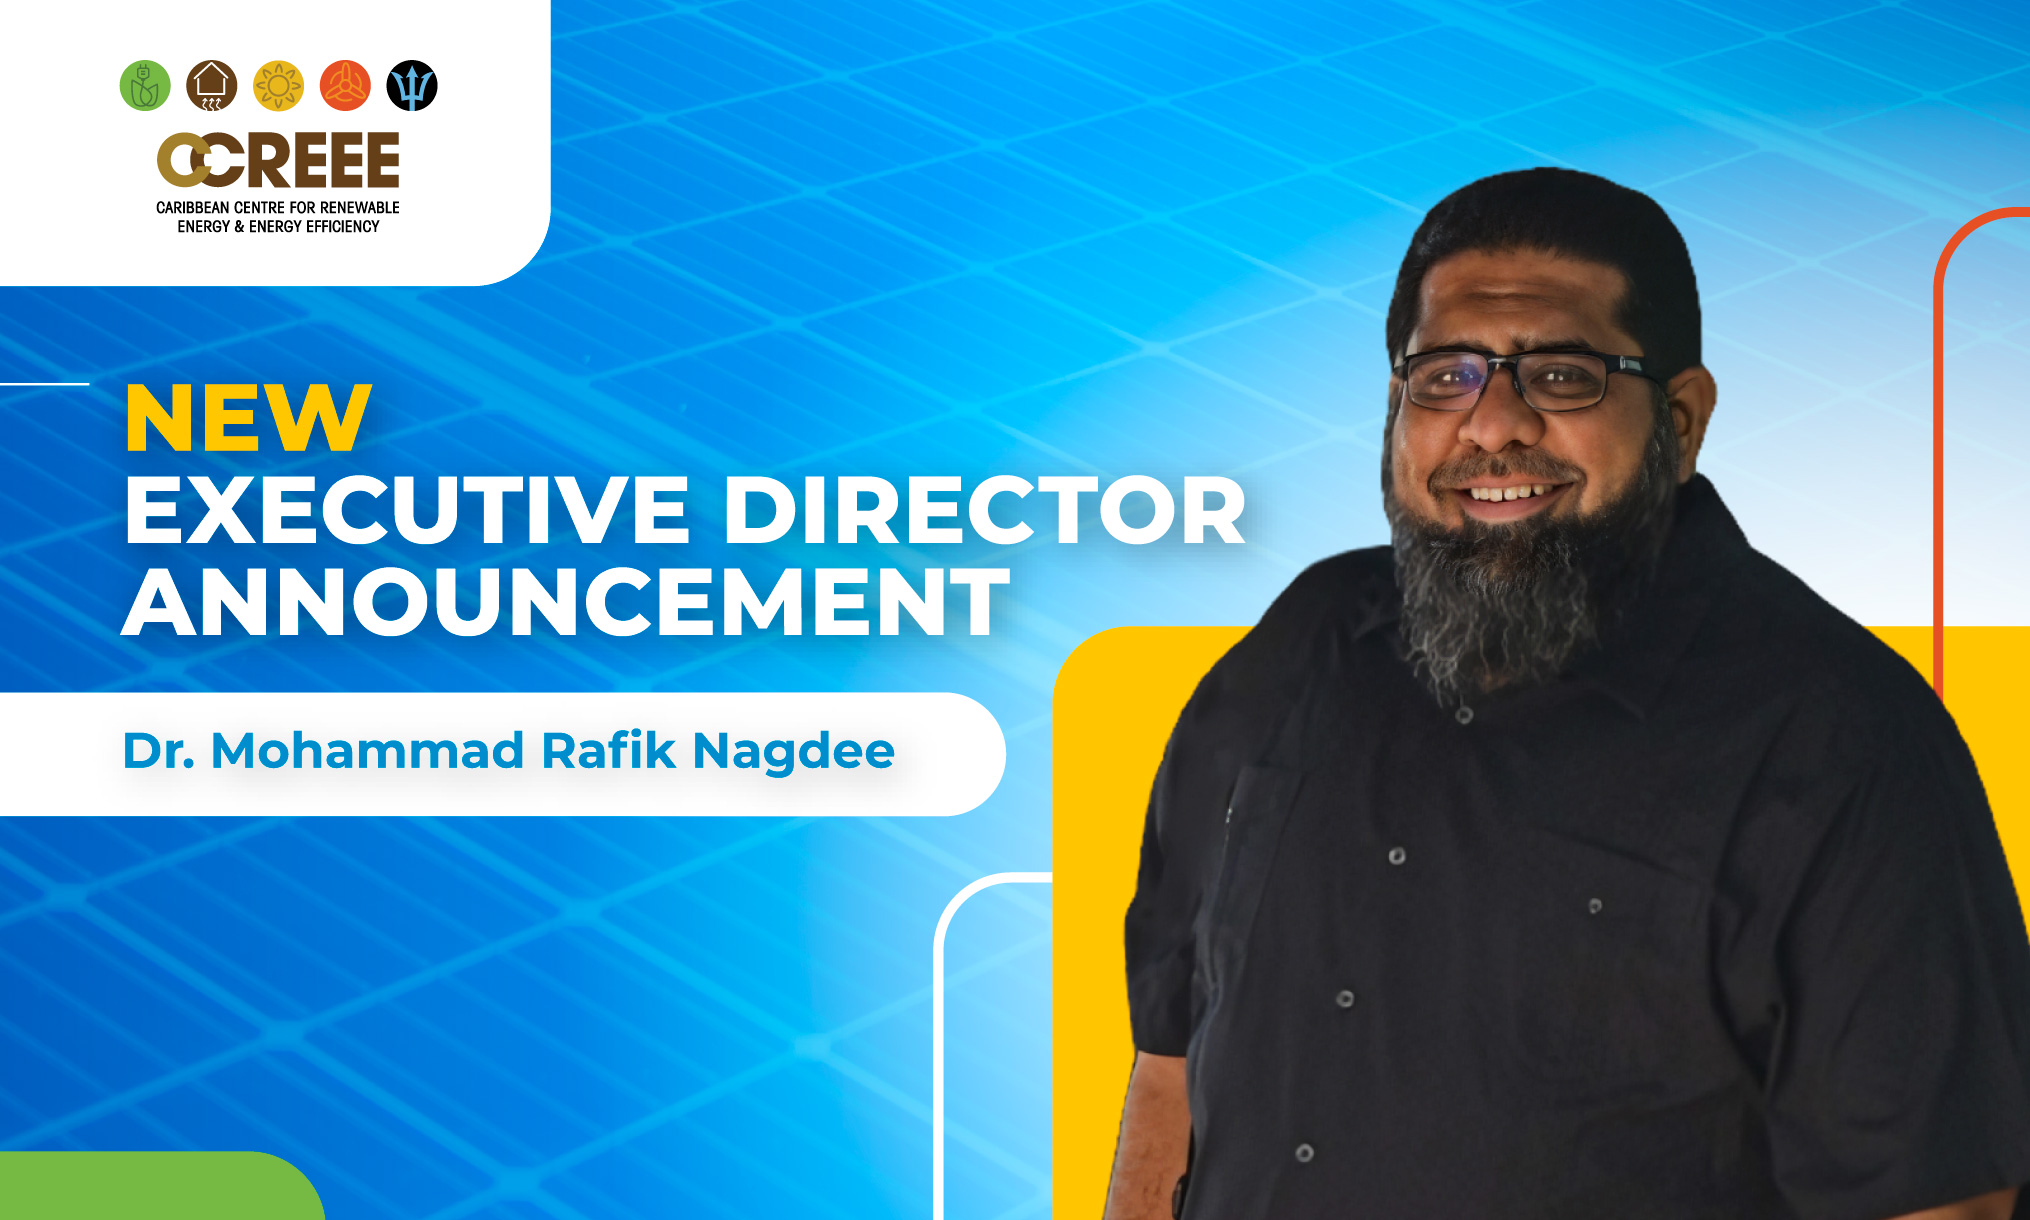 Dr. Mohammad Rafik Nagdee is Appointed as the New Executive Director of The CCREEE